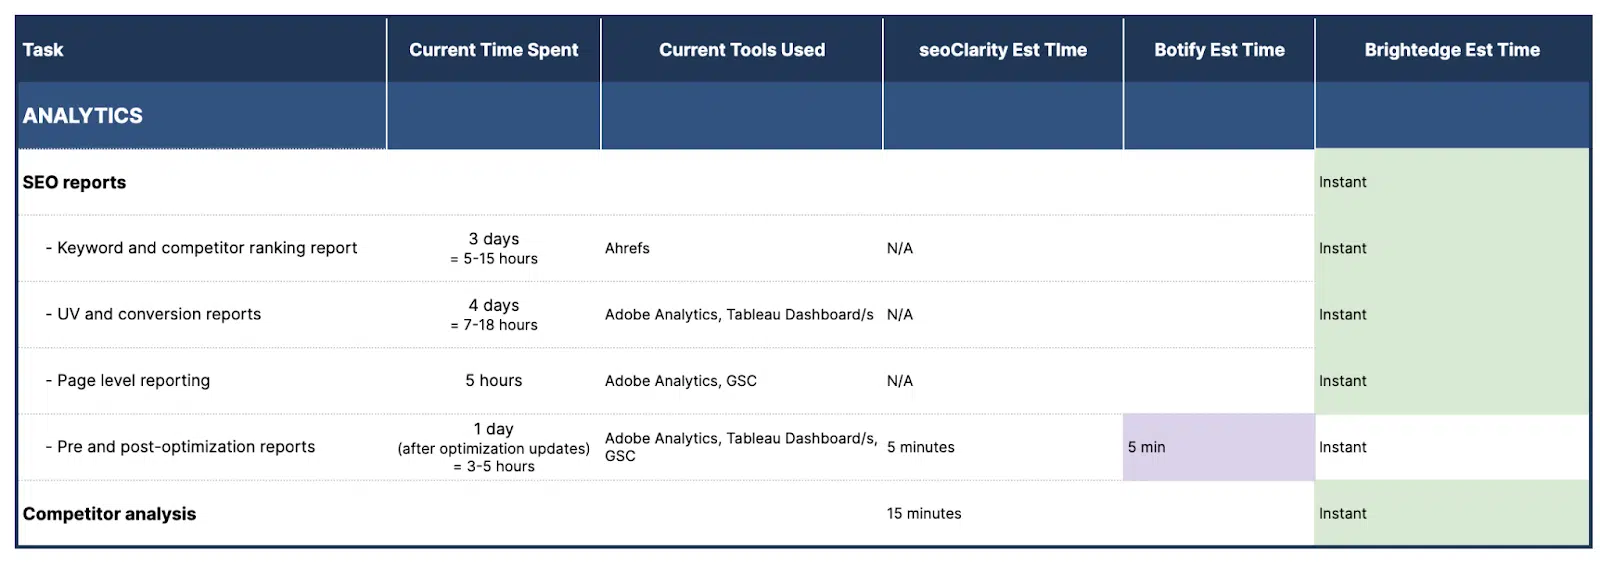 Time estimates for reporting and analytics tasks